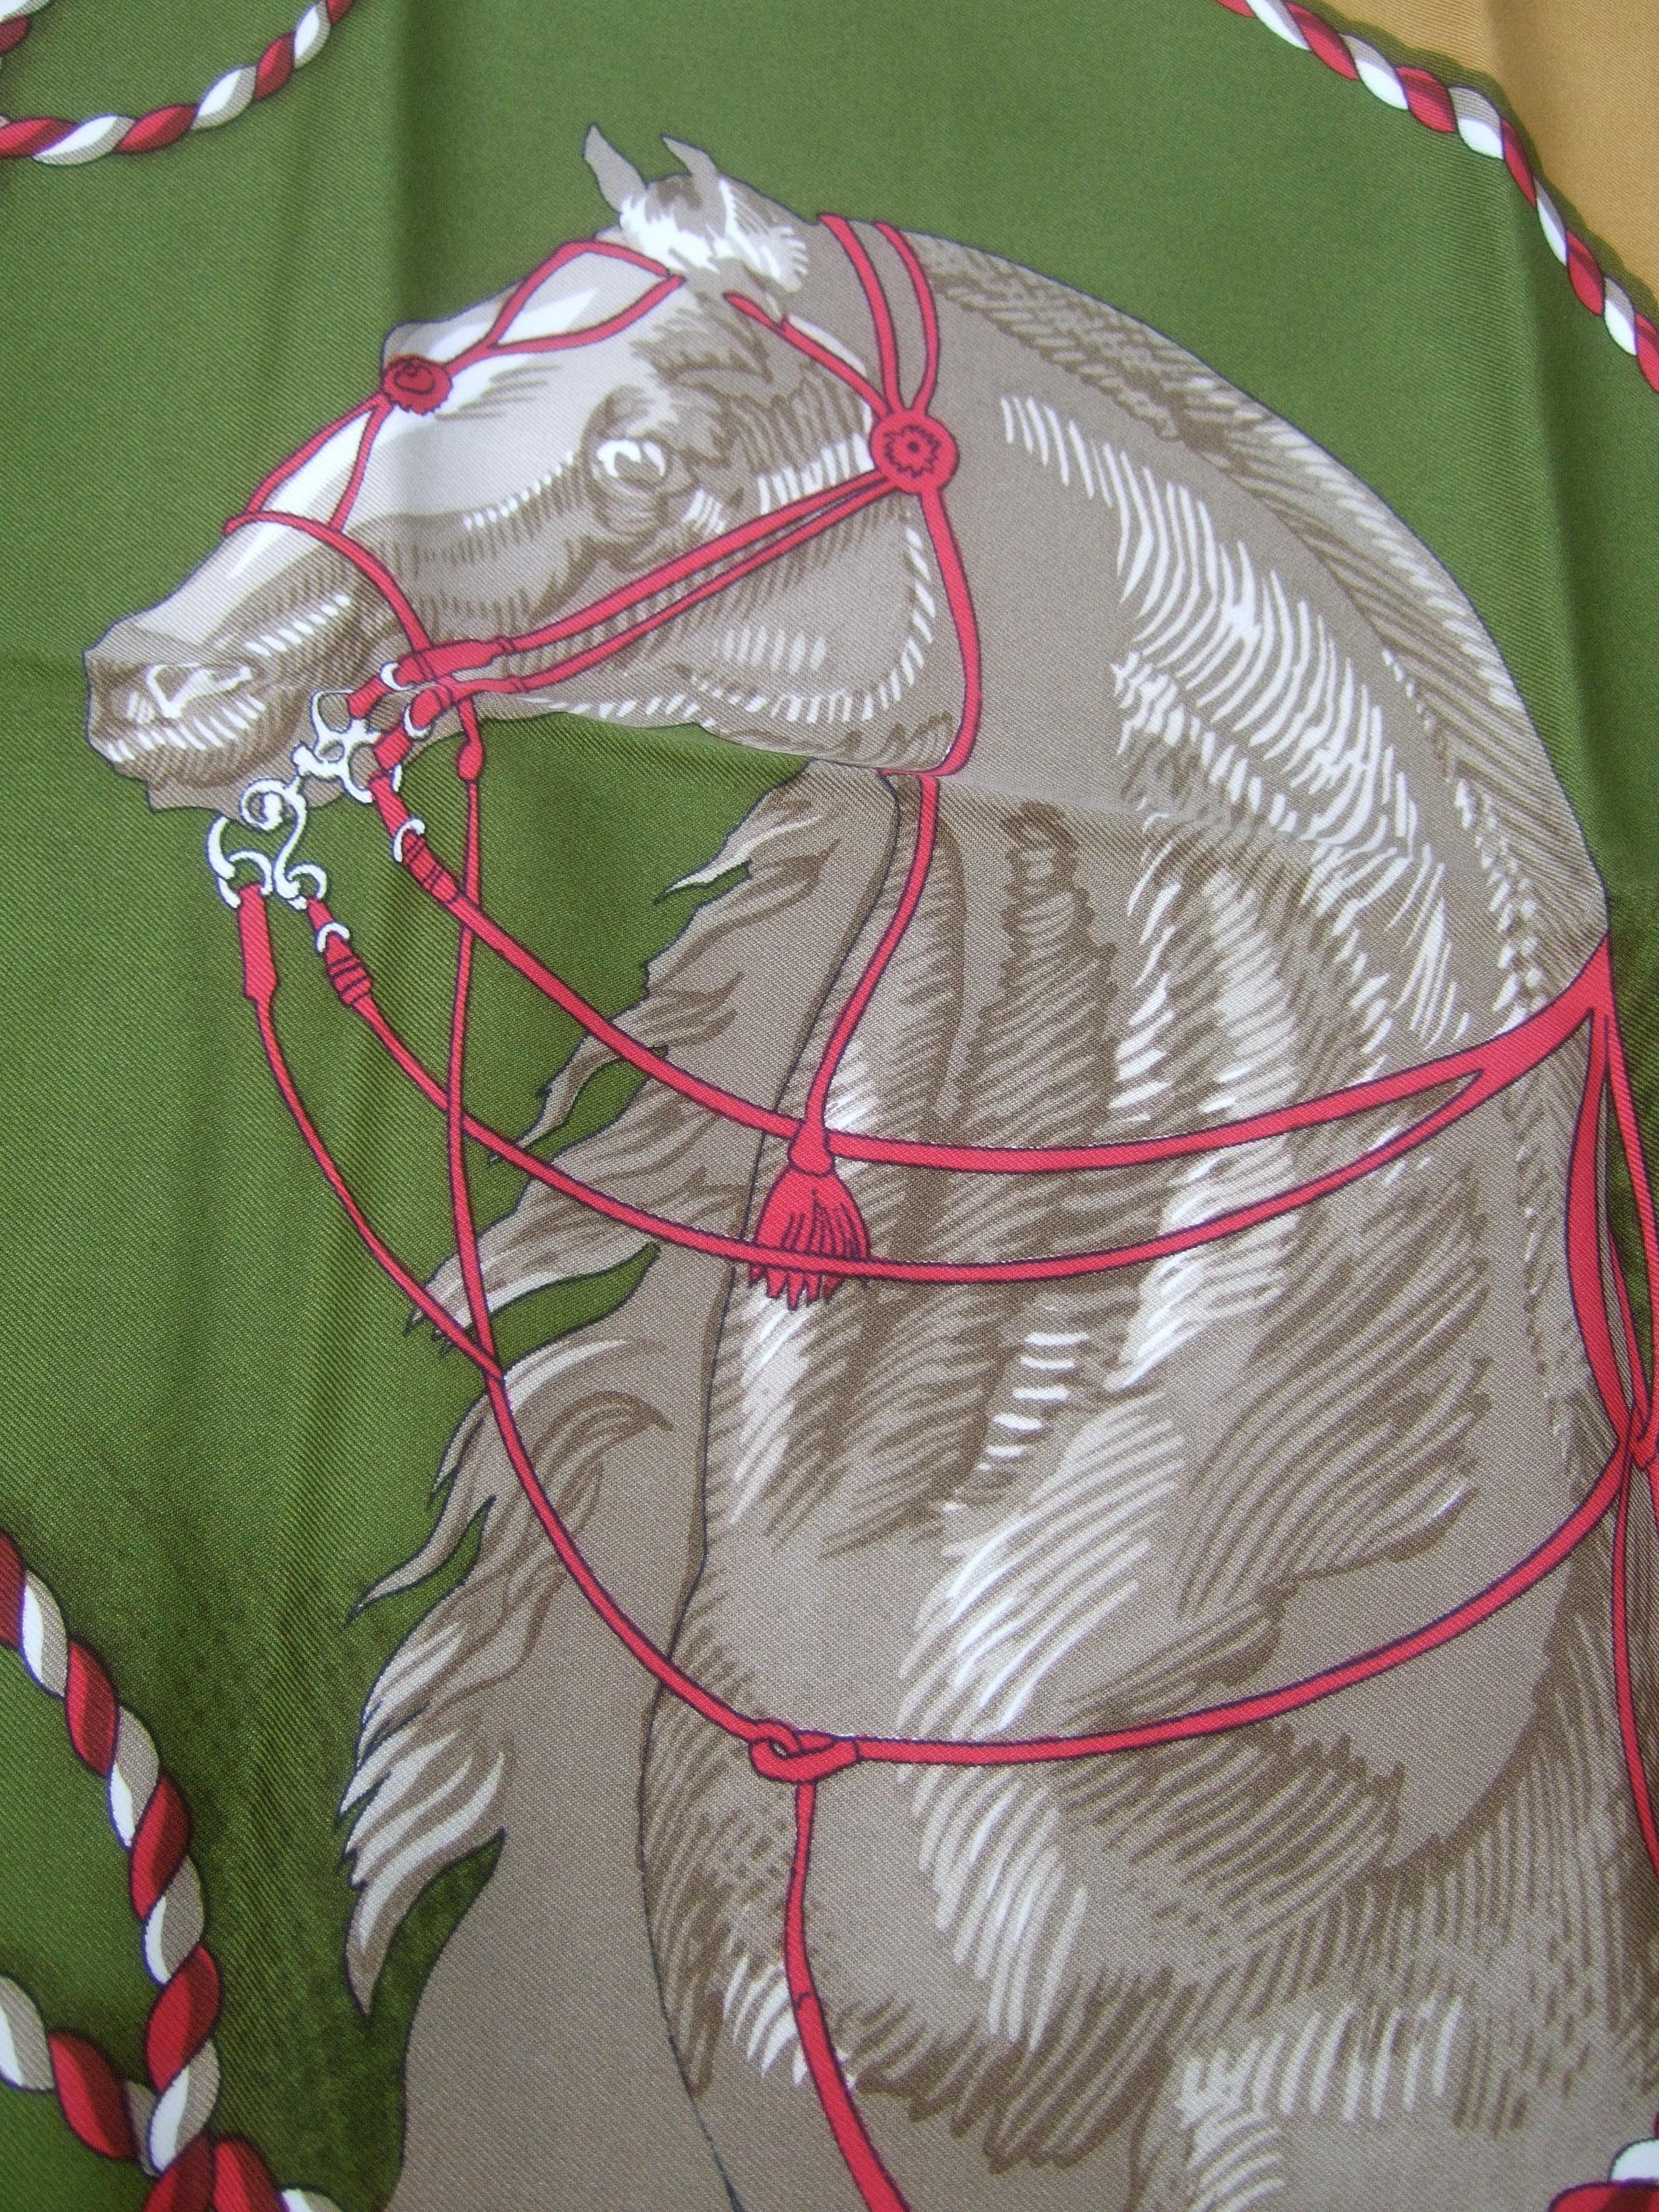 Hermes Paris Silk hand rolled Brides Legeres vintage horse themed scarf c 1980s   33 x 34 in
The luxurious silk hand rolled scarf is illustarted with a collection of majestic
horse figures. The horse figures are illuminated against a moss green &